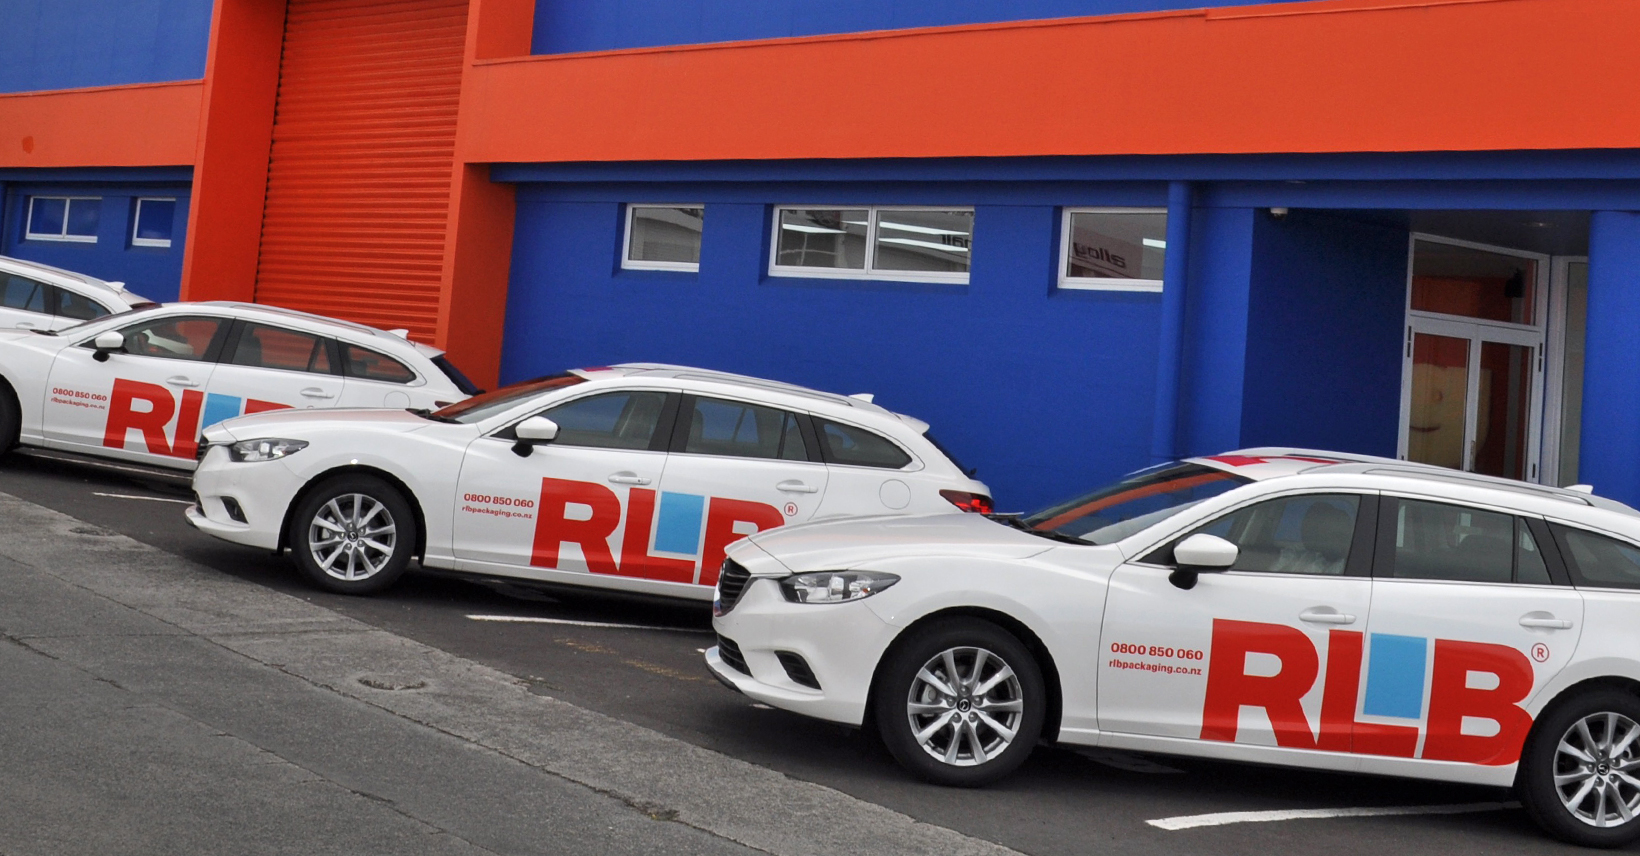 RLB Packaging fleet wrapped in company livery